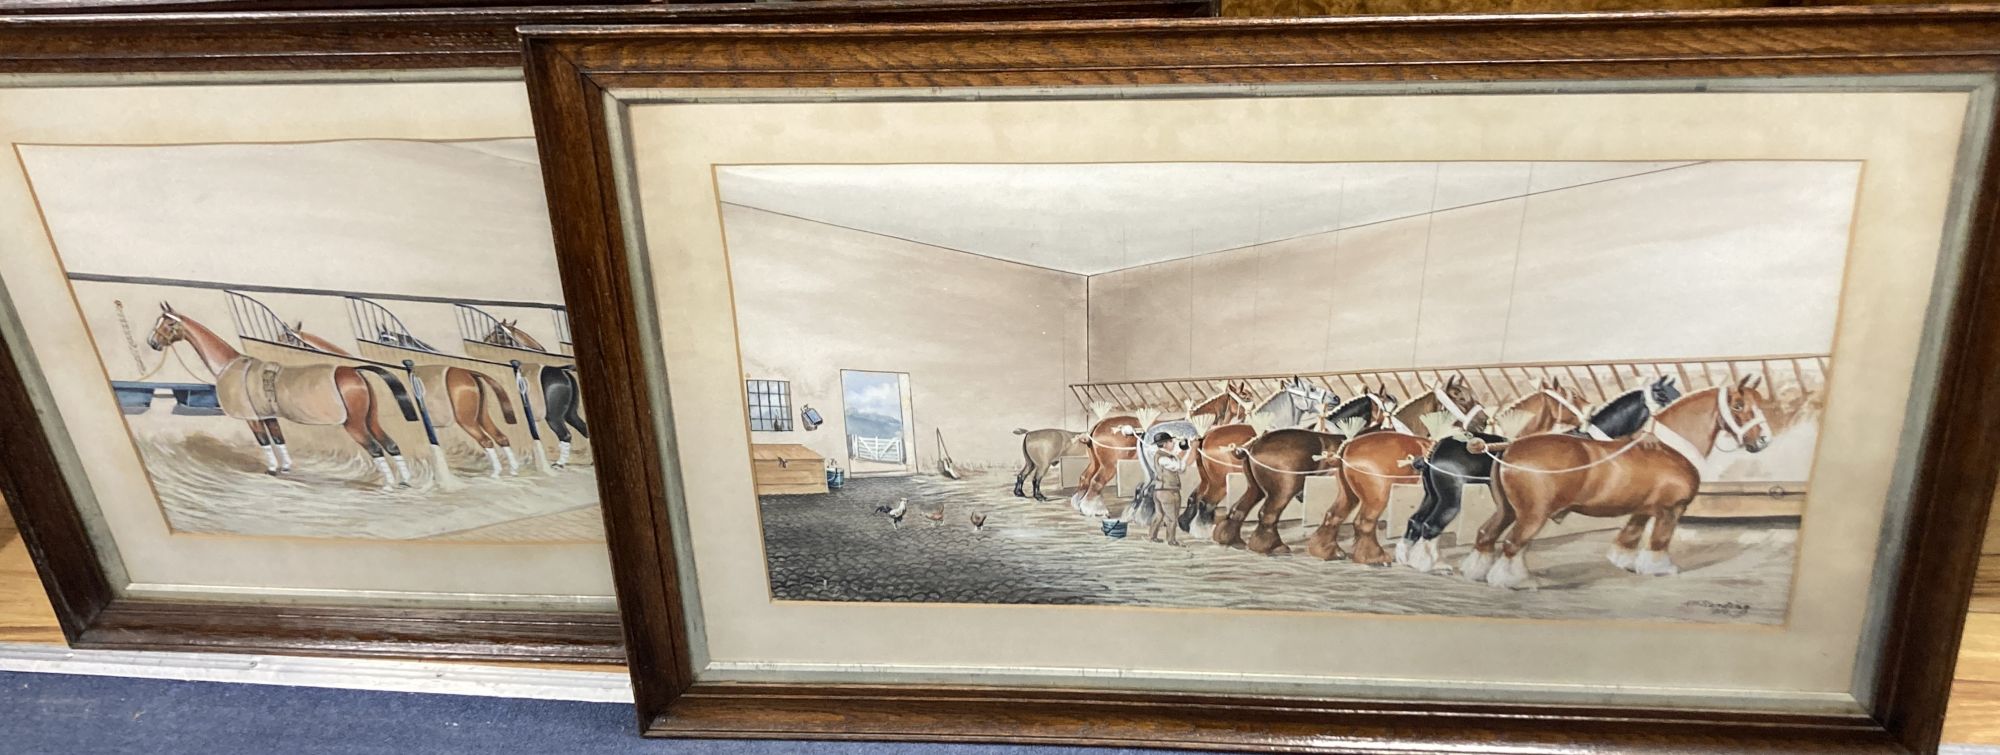 Henry William Standing (1894-1931), pair of watercolours, Heavy horses and groom in a stall, signed and dated 1910, 36 x 74cm